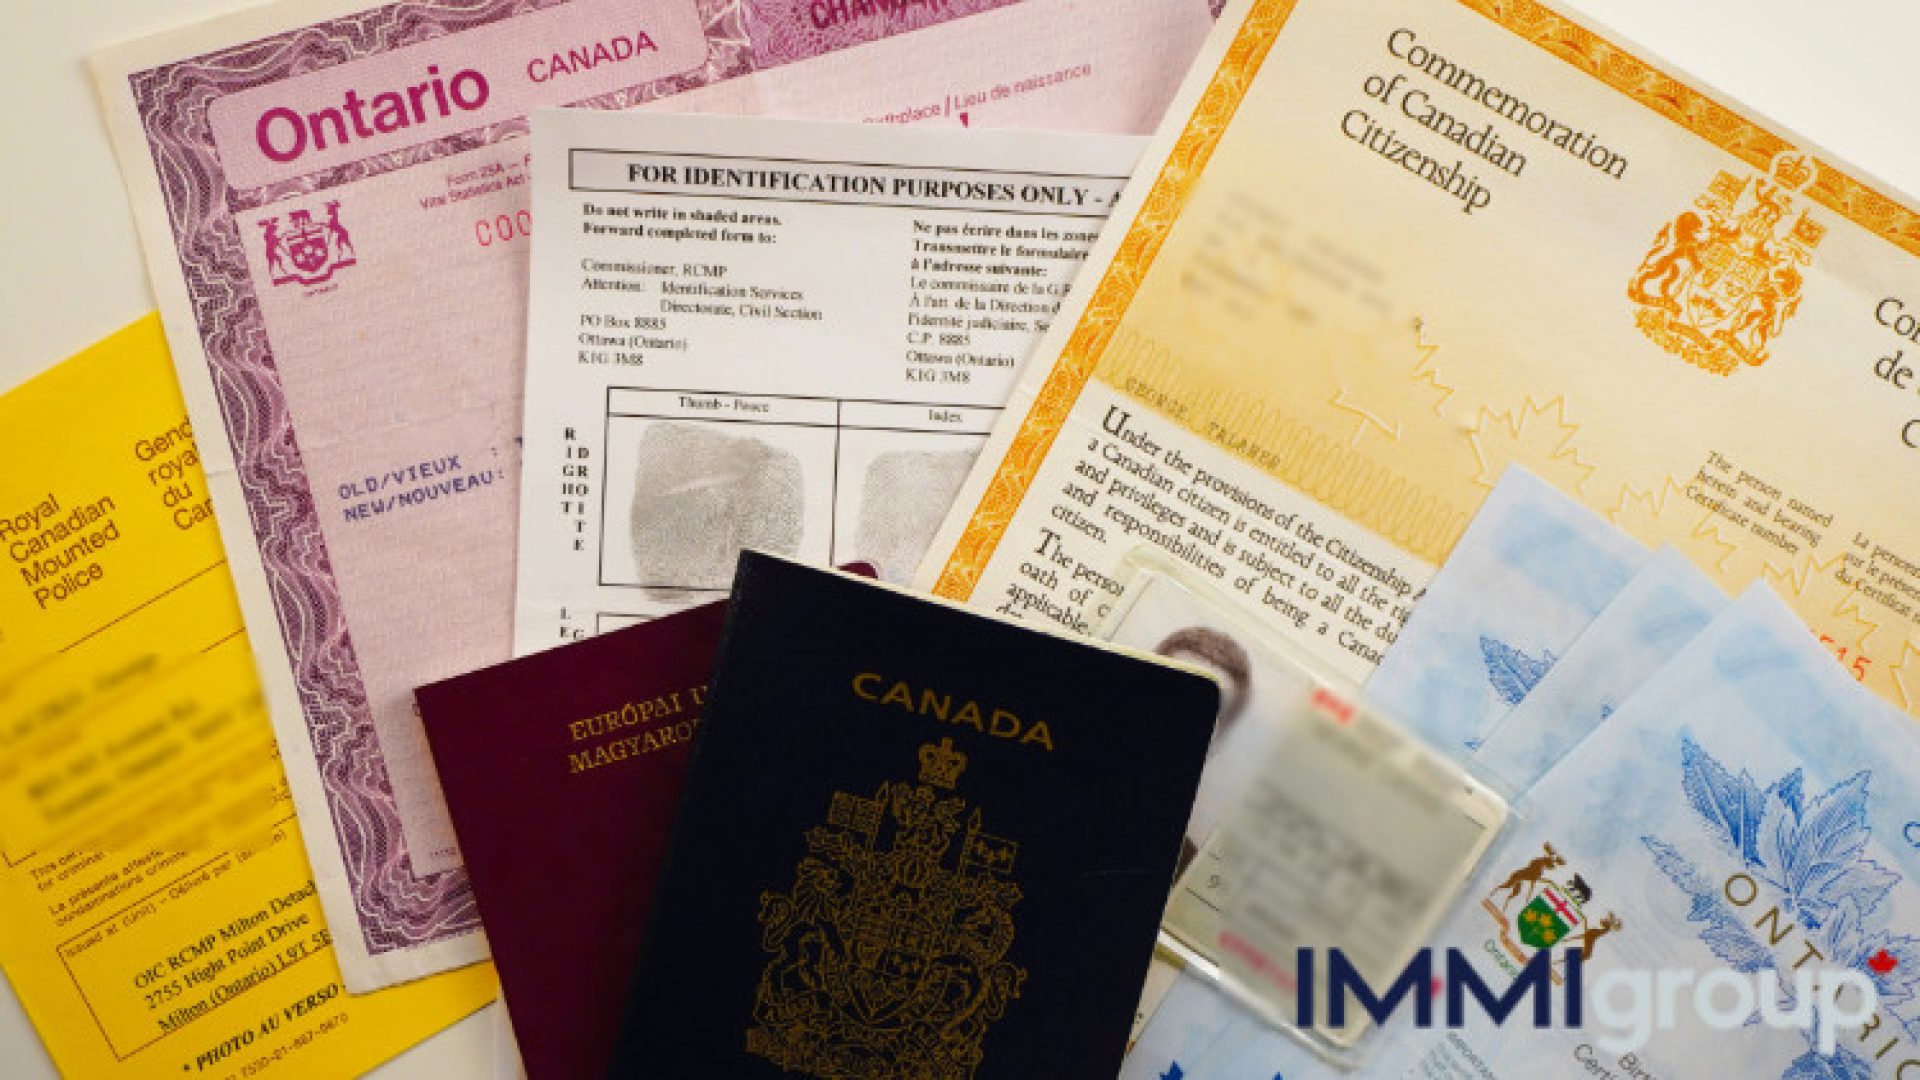 prove your Canadian citizenship with documents